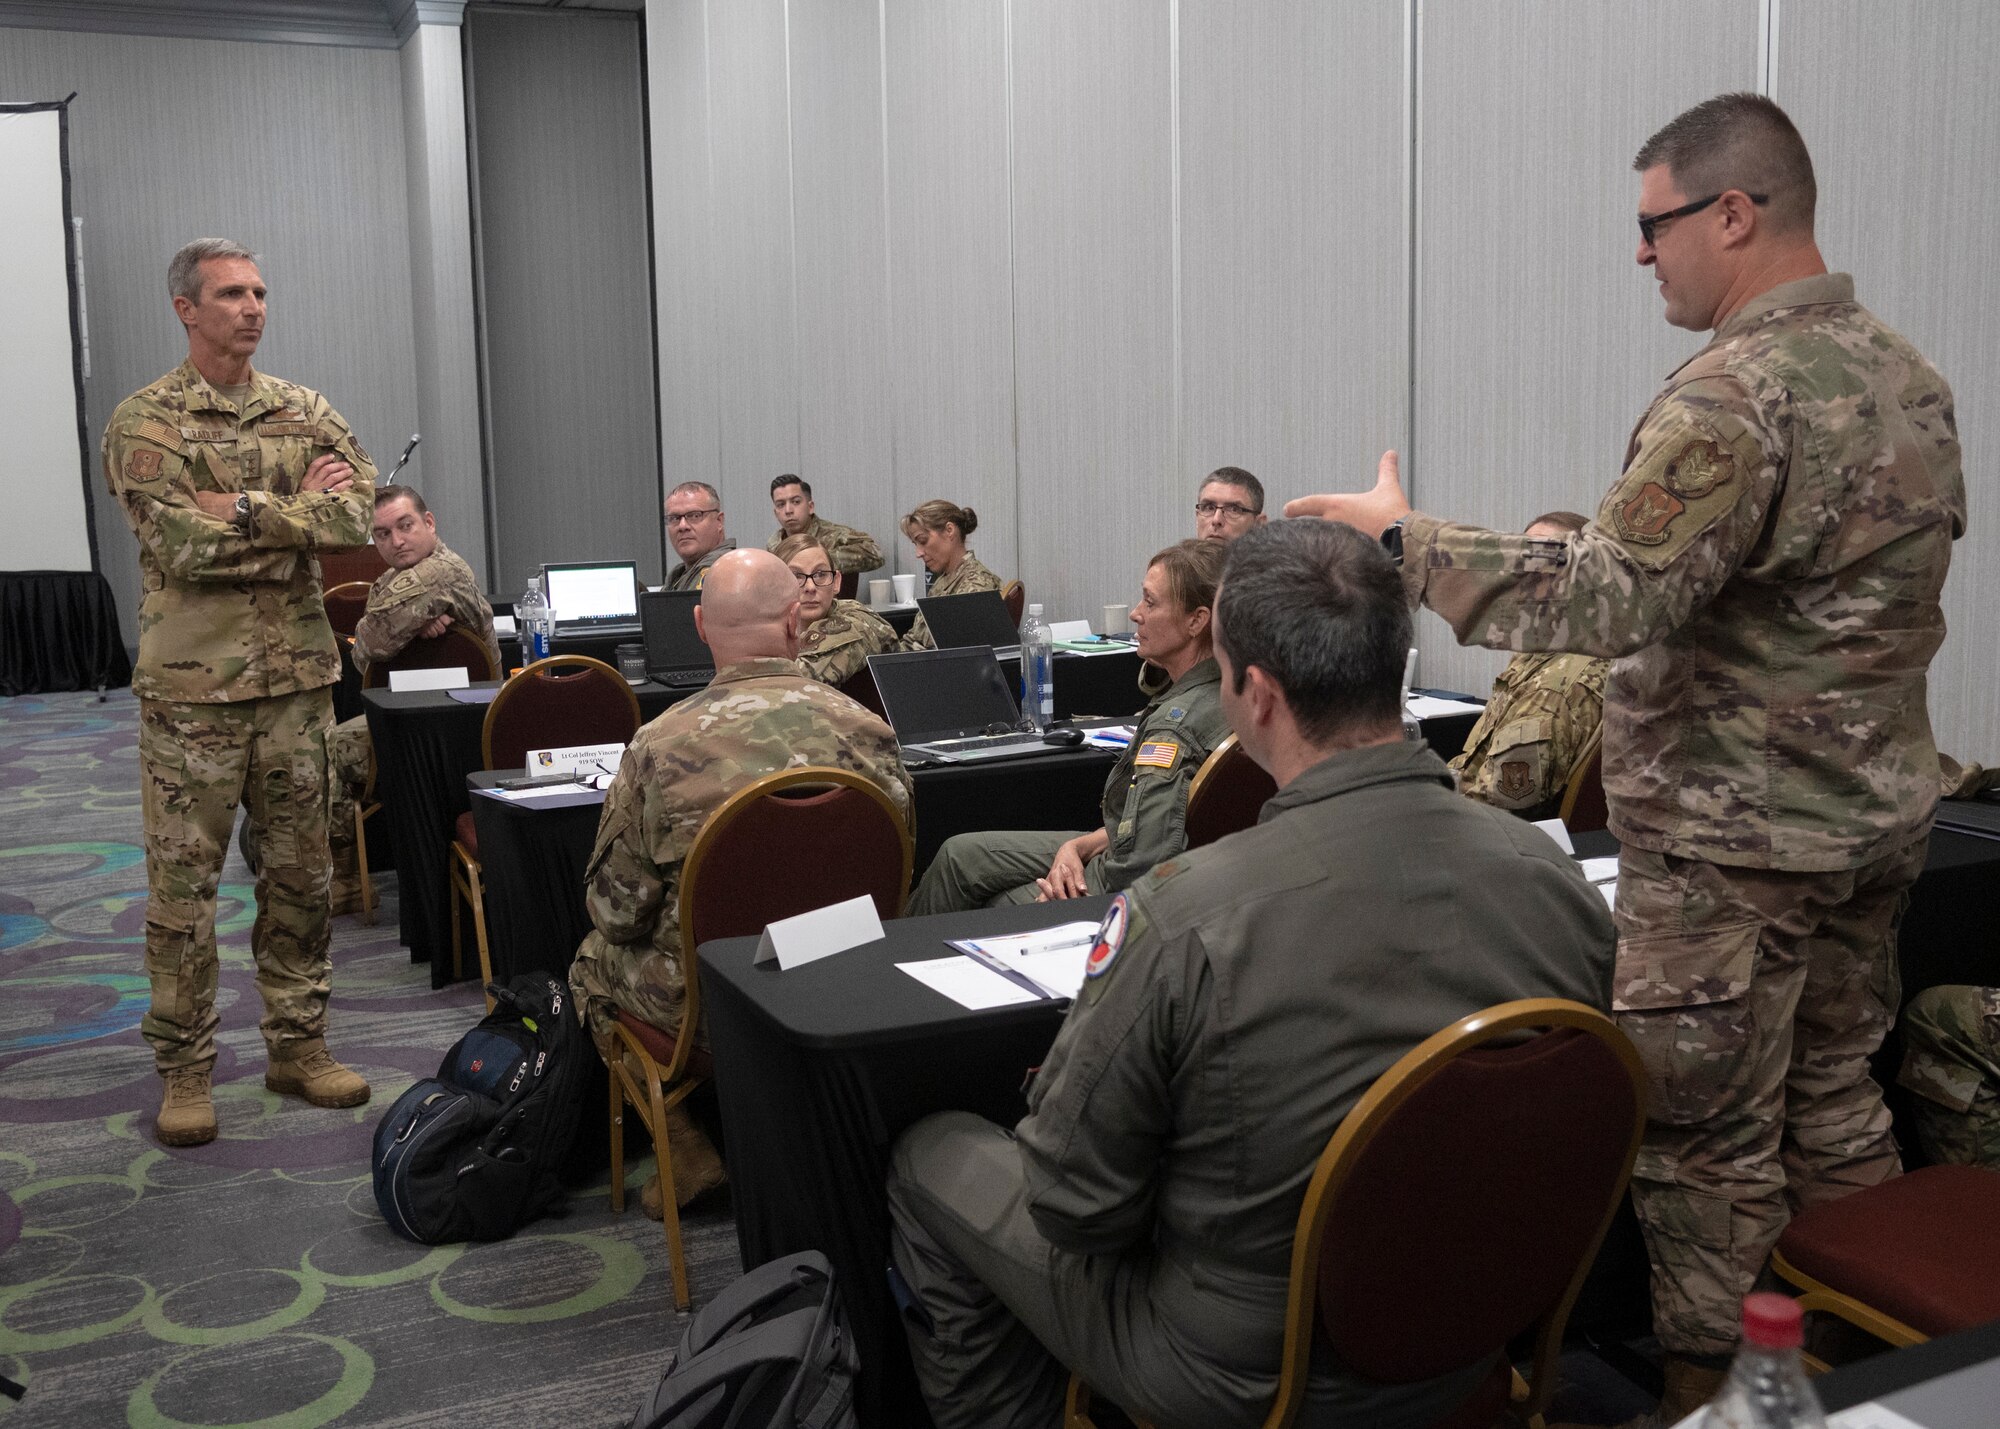 Commander points to paper while addressing 40 people in a room during Inspector General Inspection (IGI) teams across the Numbered Air Force during the first-ever 10th AF IGI conference